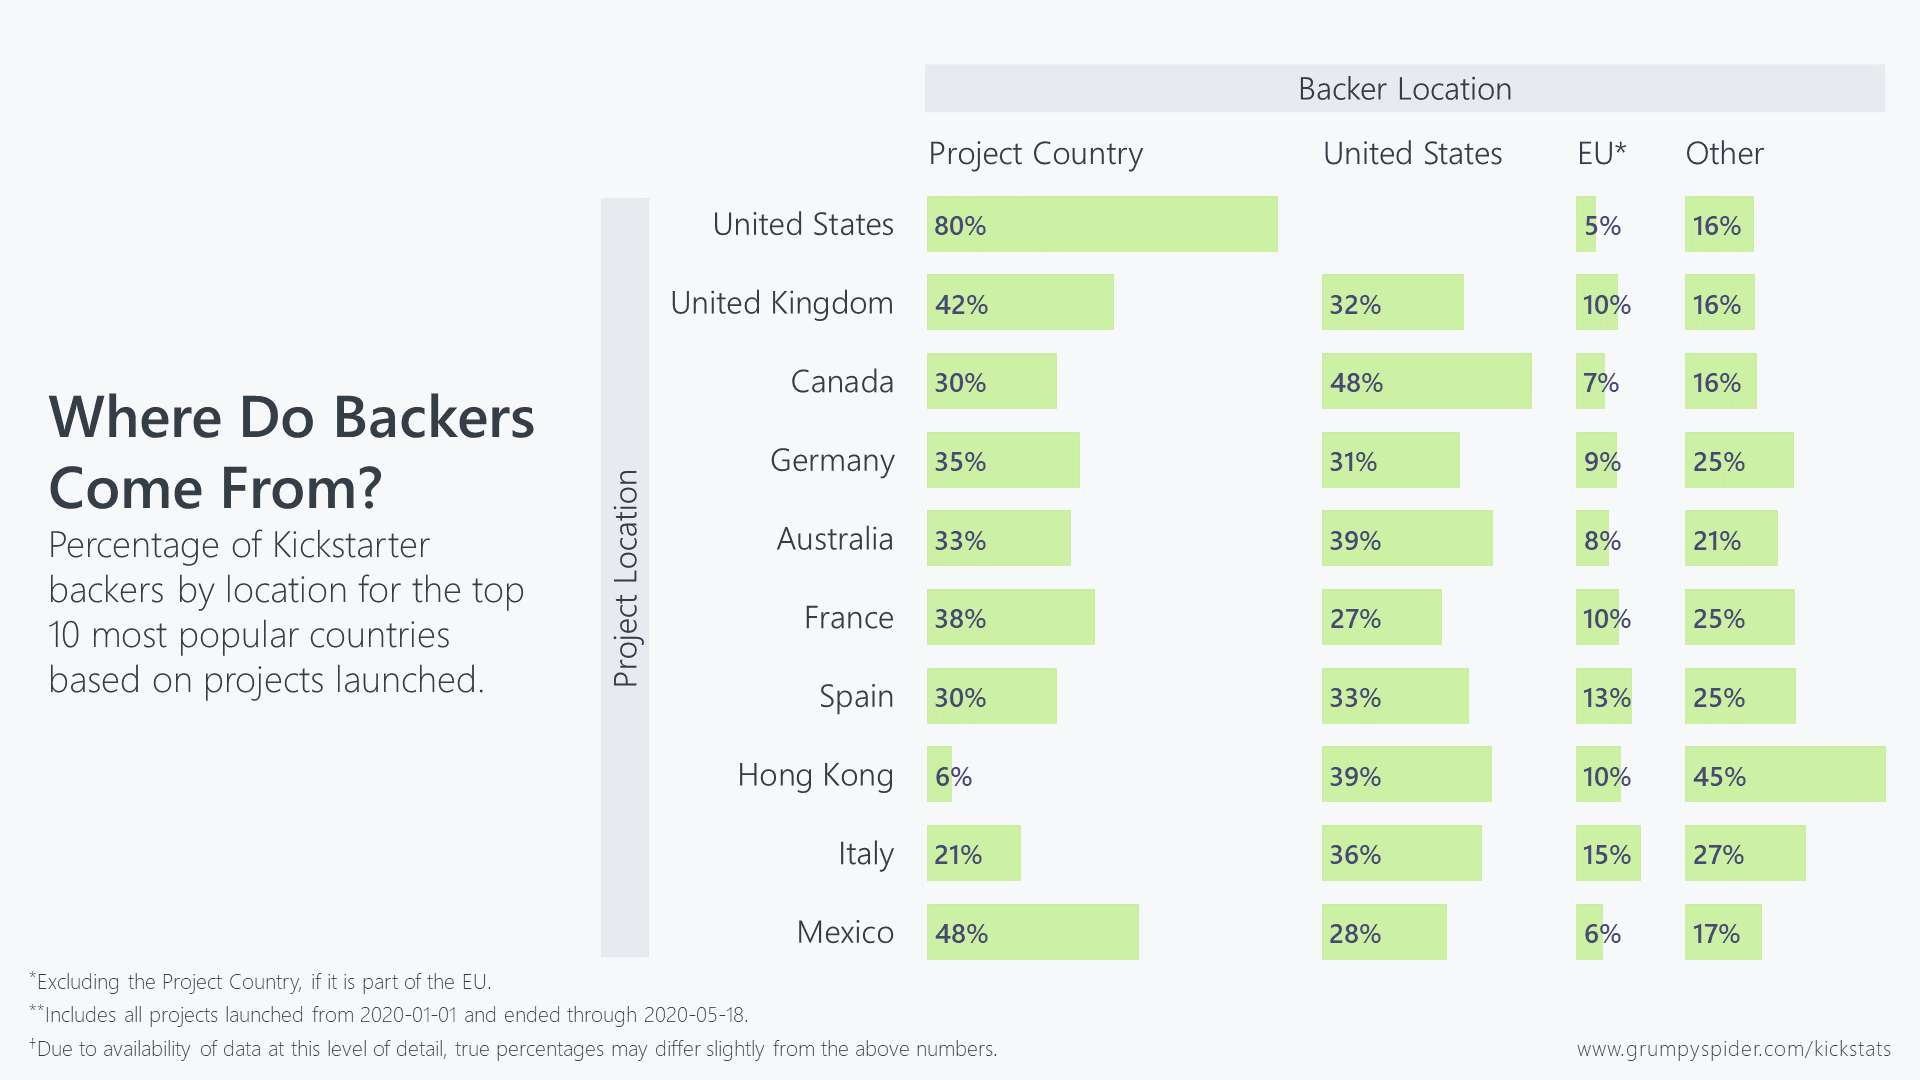 Chart showing average distribution of Kickstarter backer locations by project country.